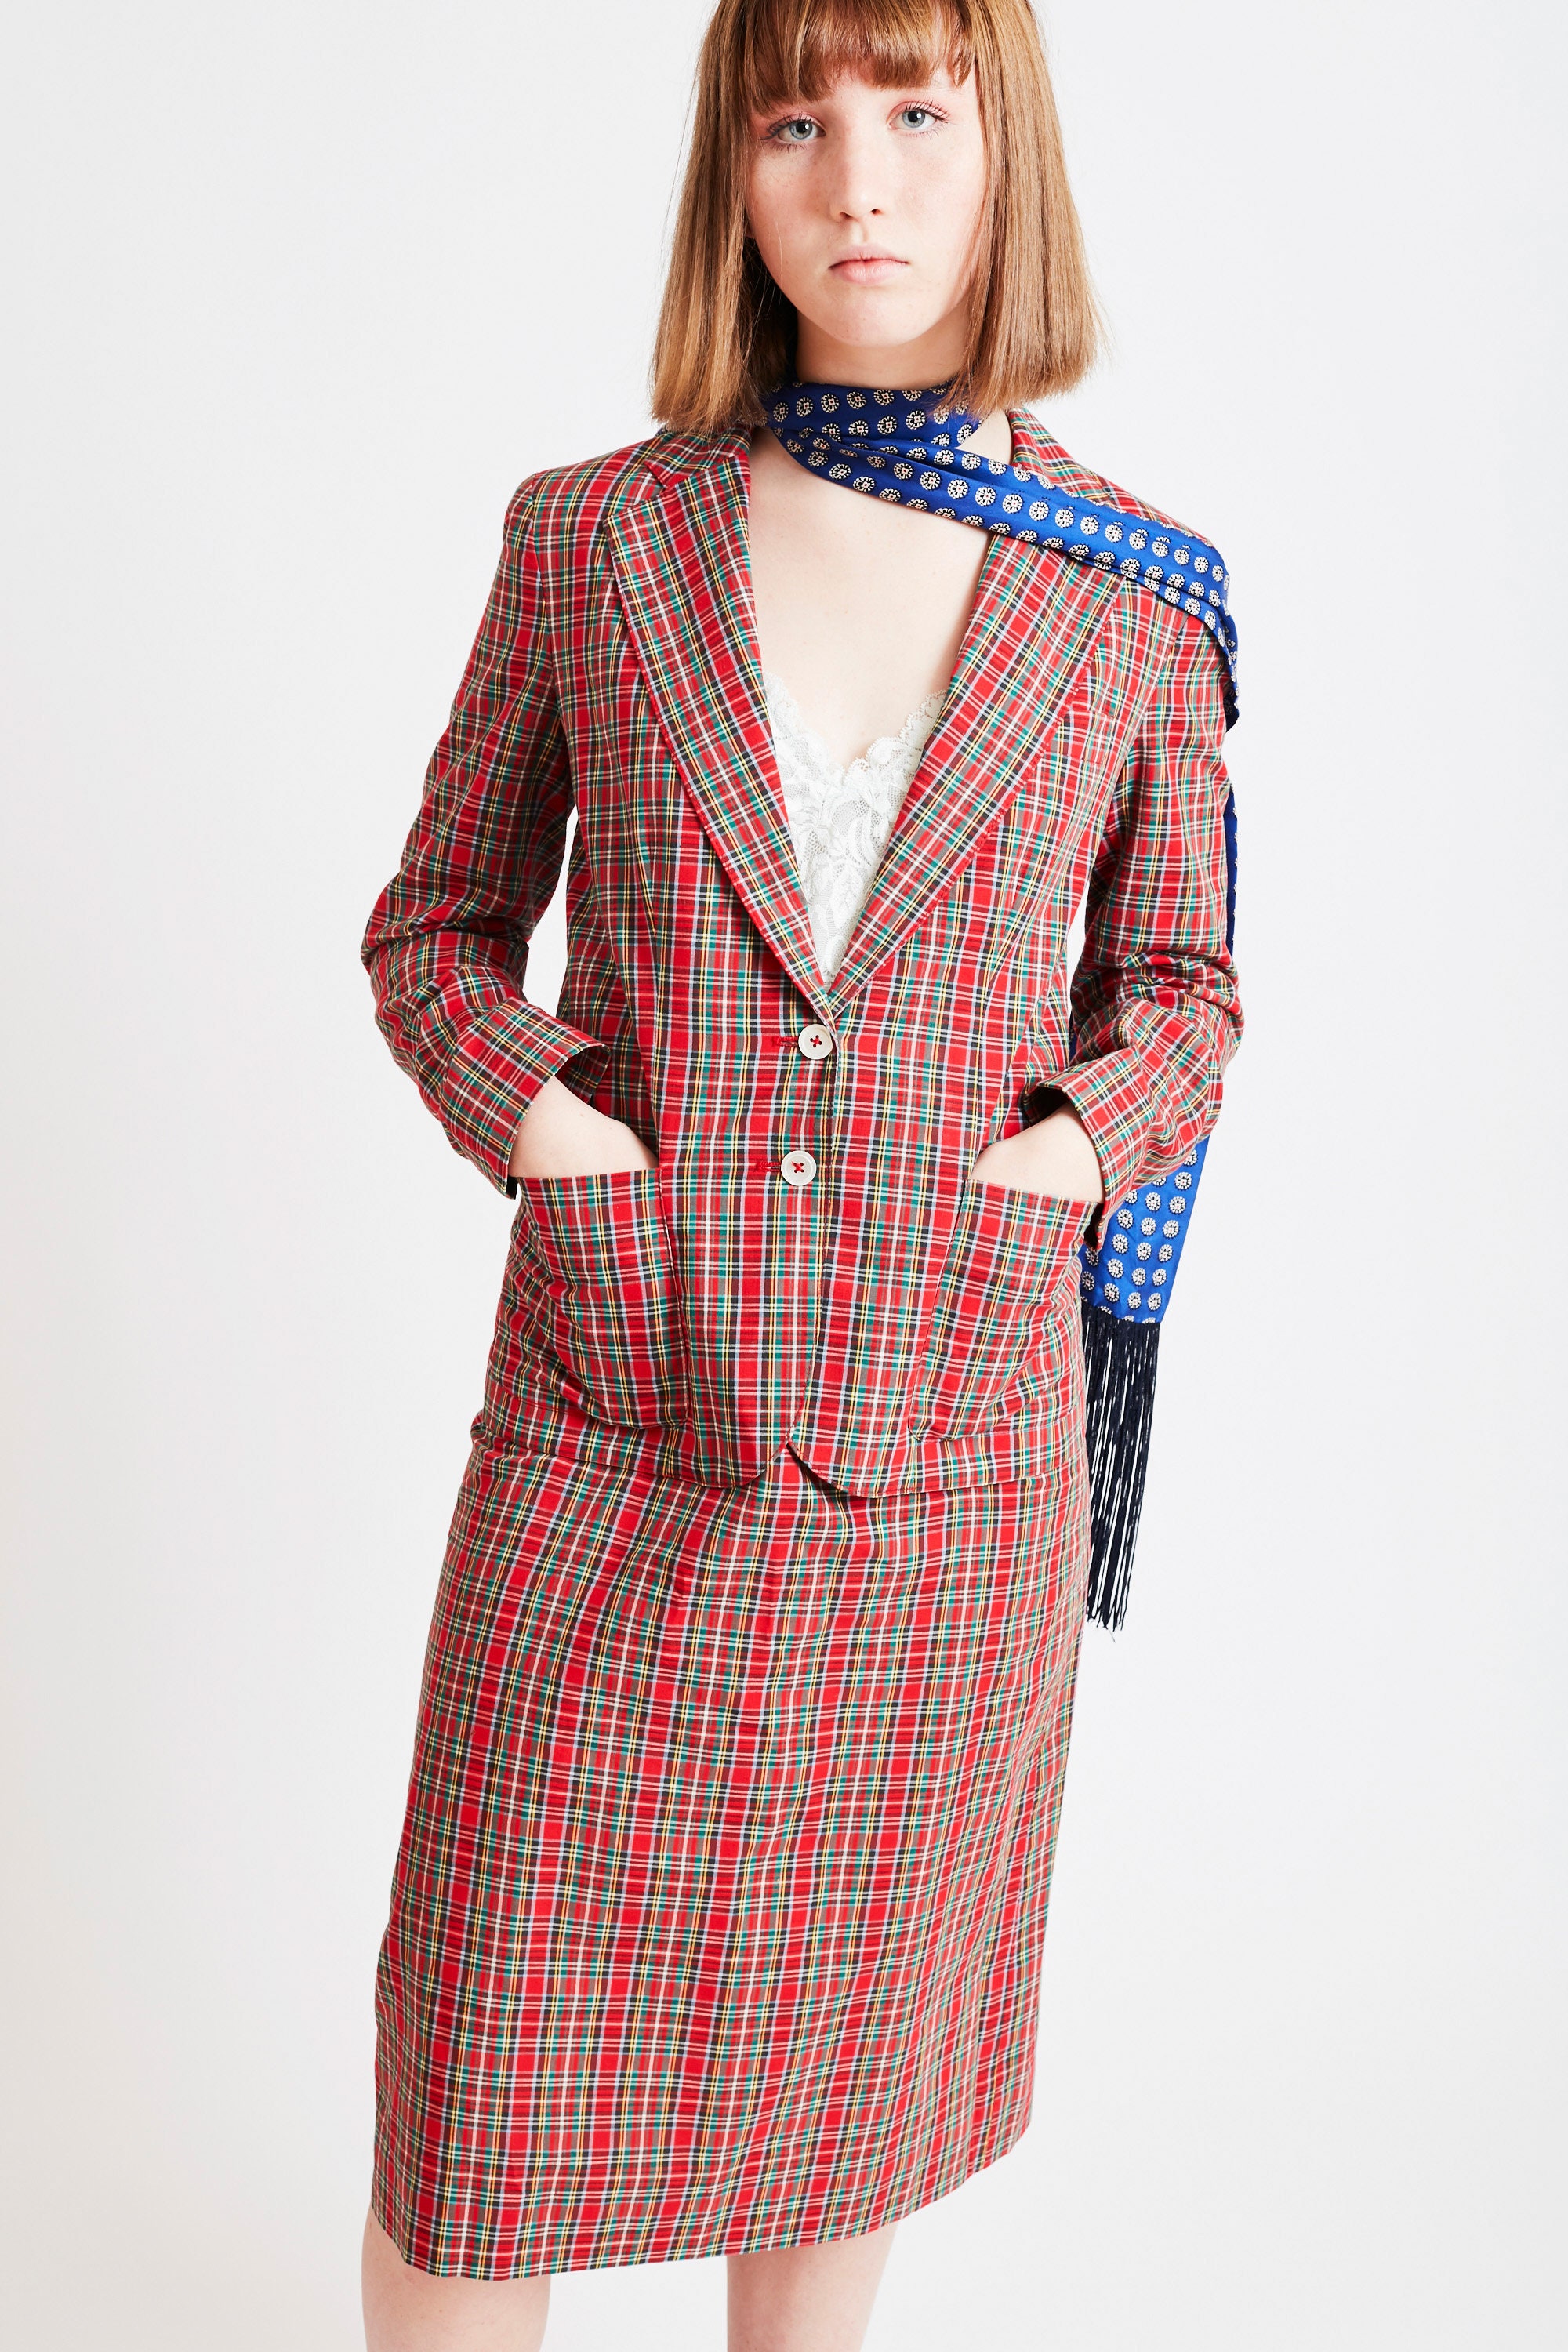 Plaid Skirt Suit With Matching Belt - Etsy